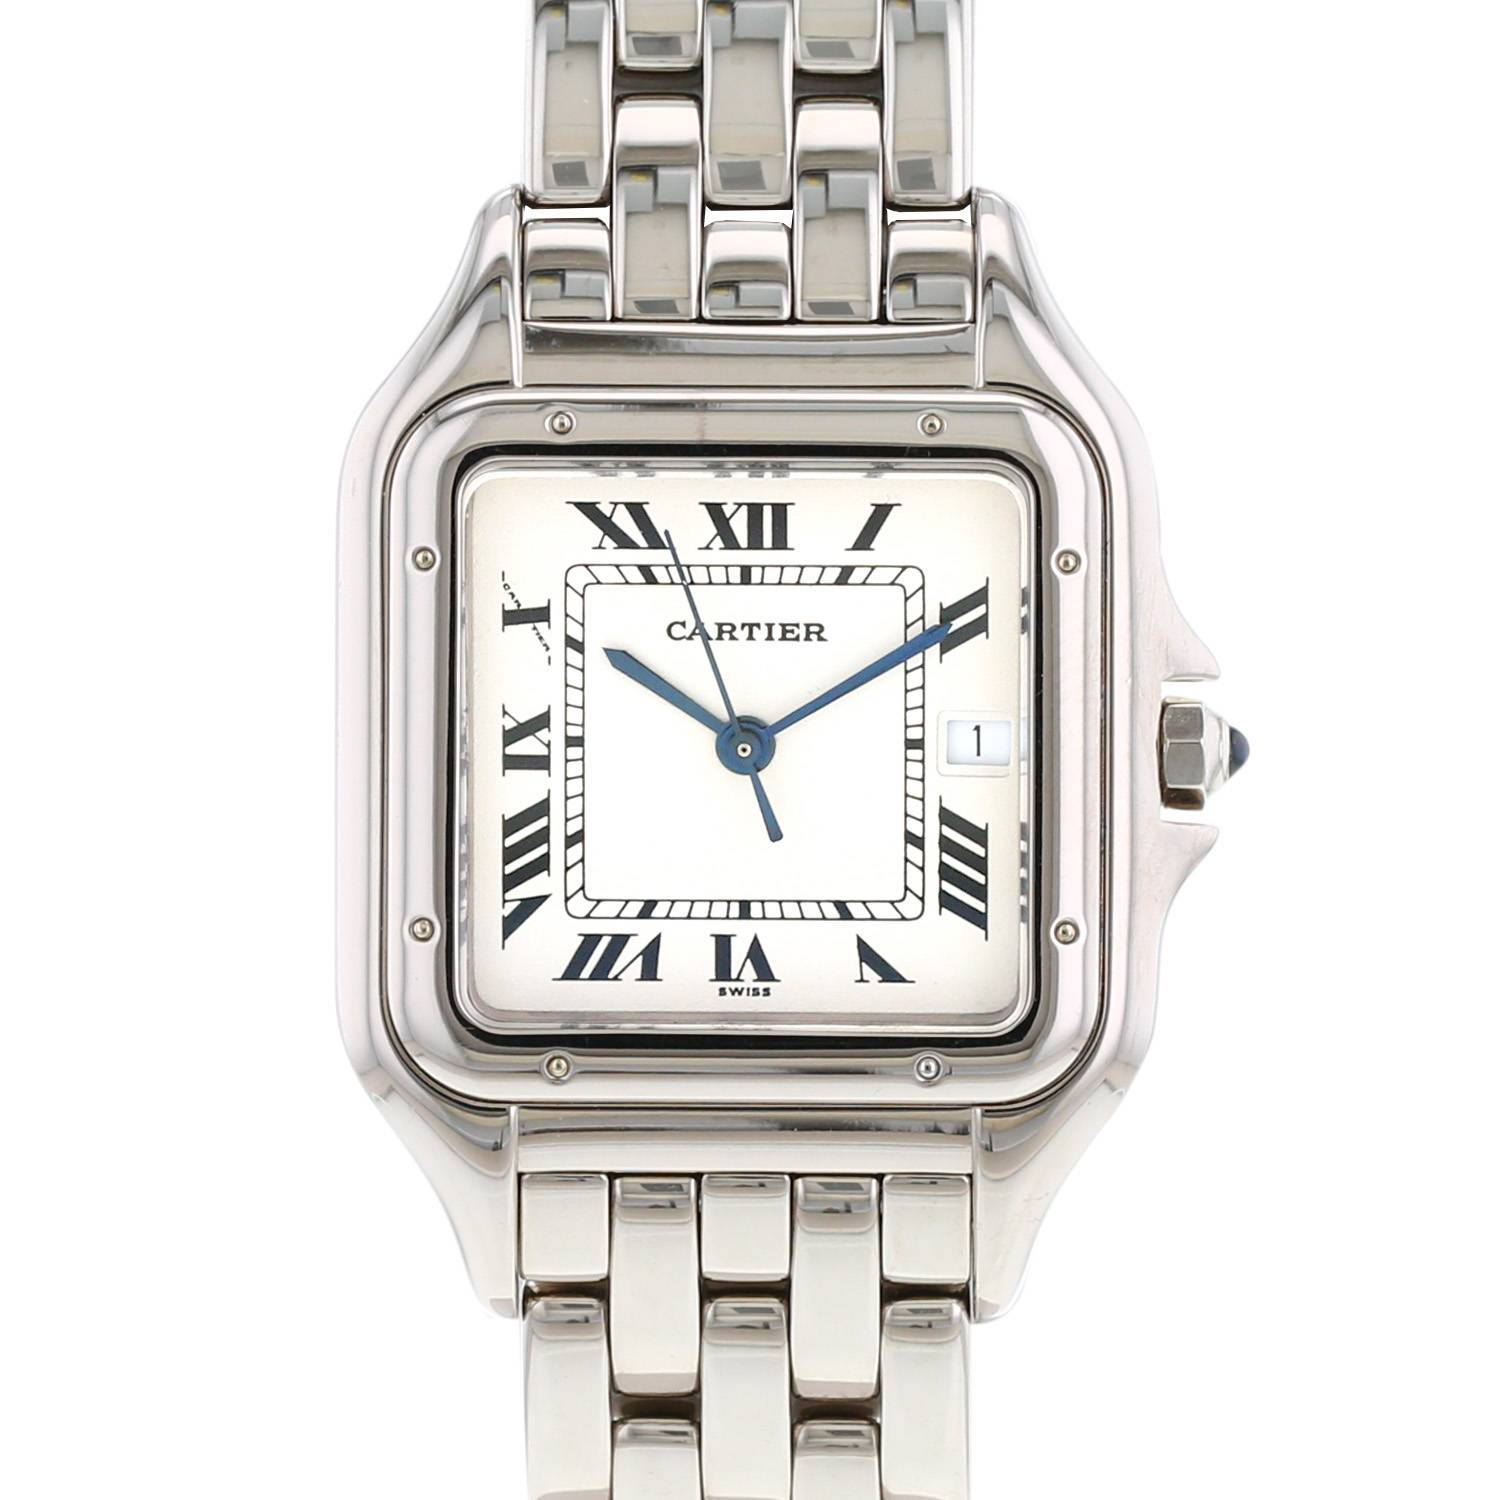 The Most Collectible Watches Of The 1990s